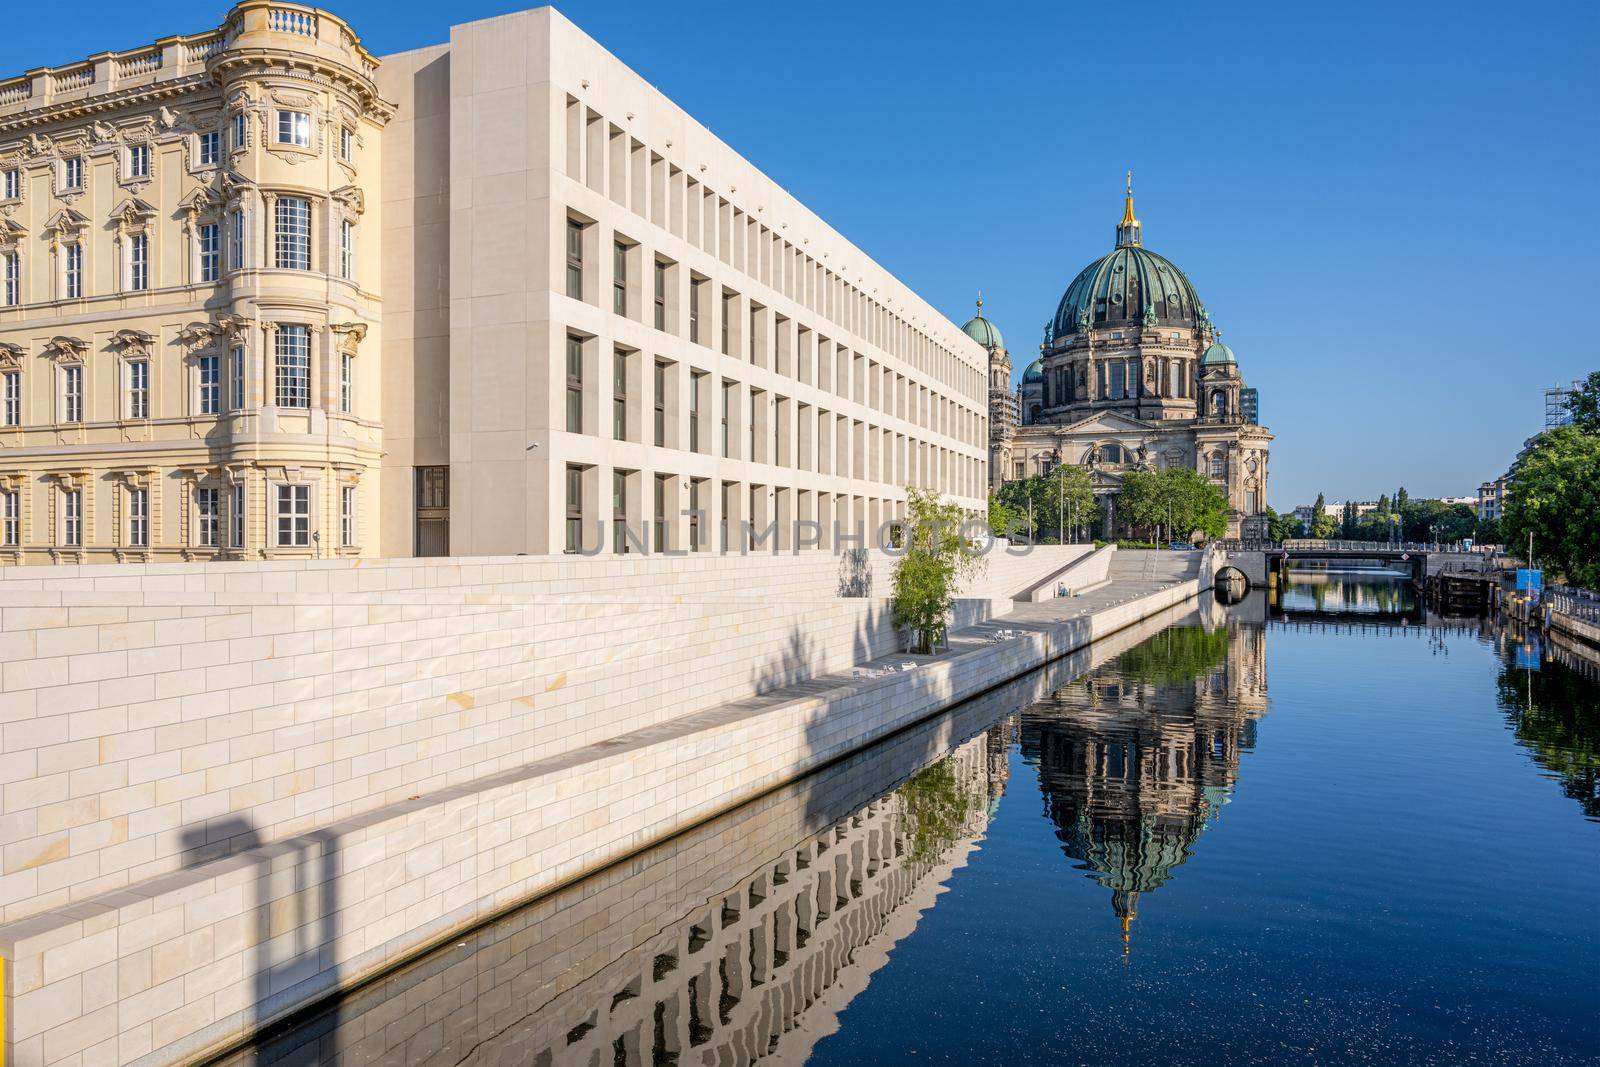 The Berliner Dom with the reconstructed City Palace by elxeneize